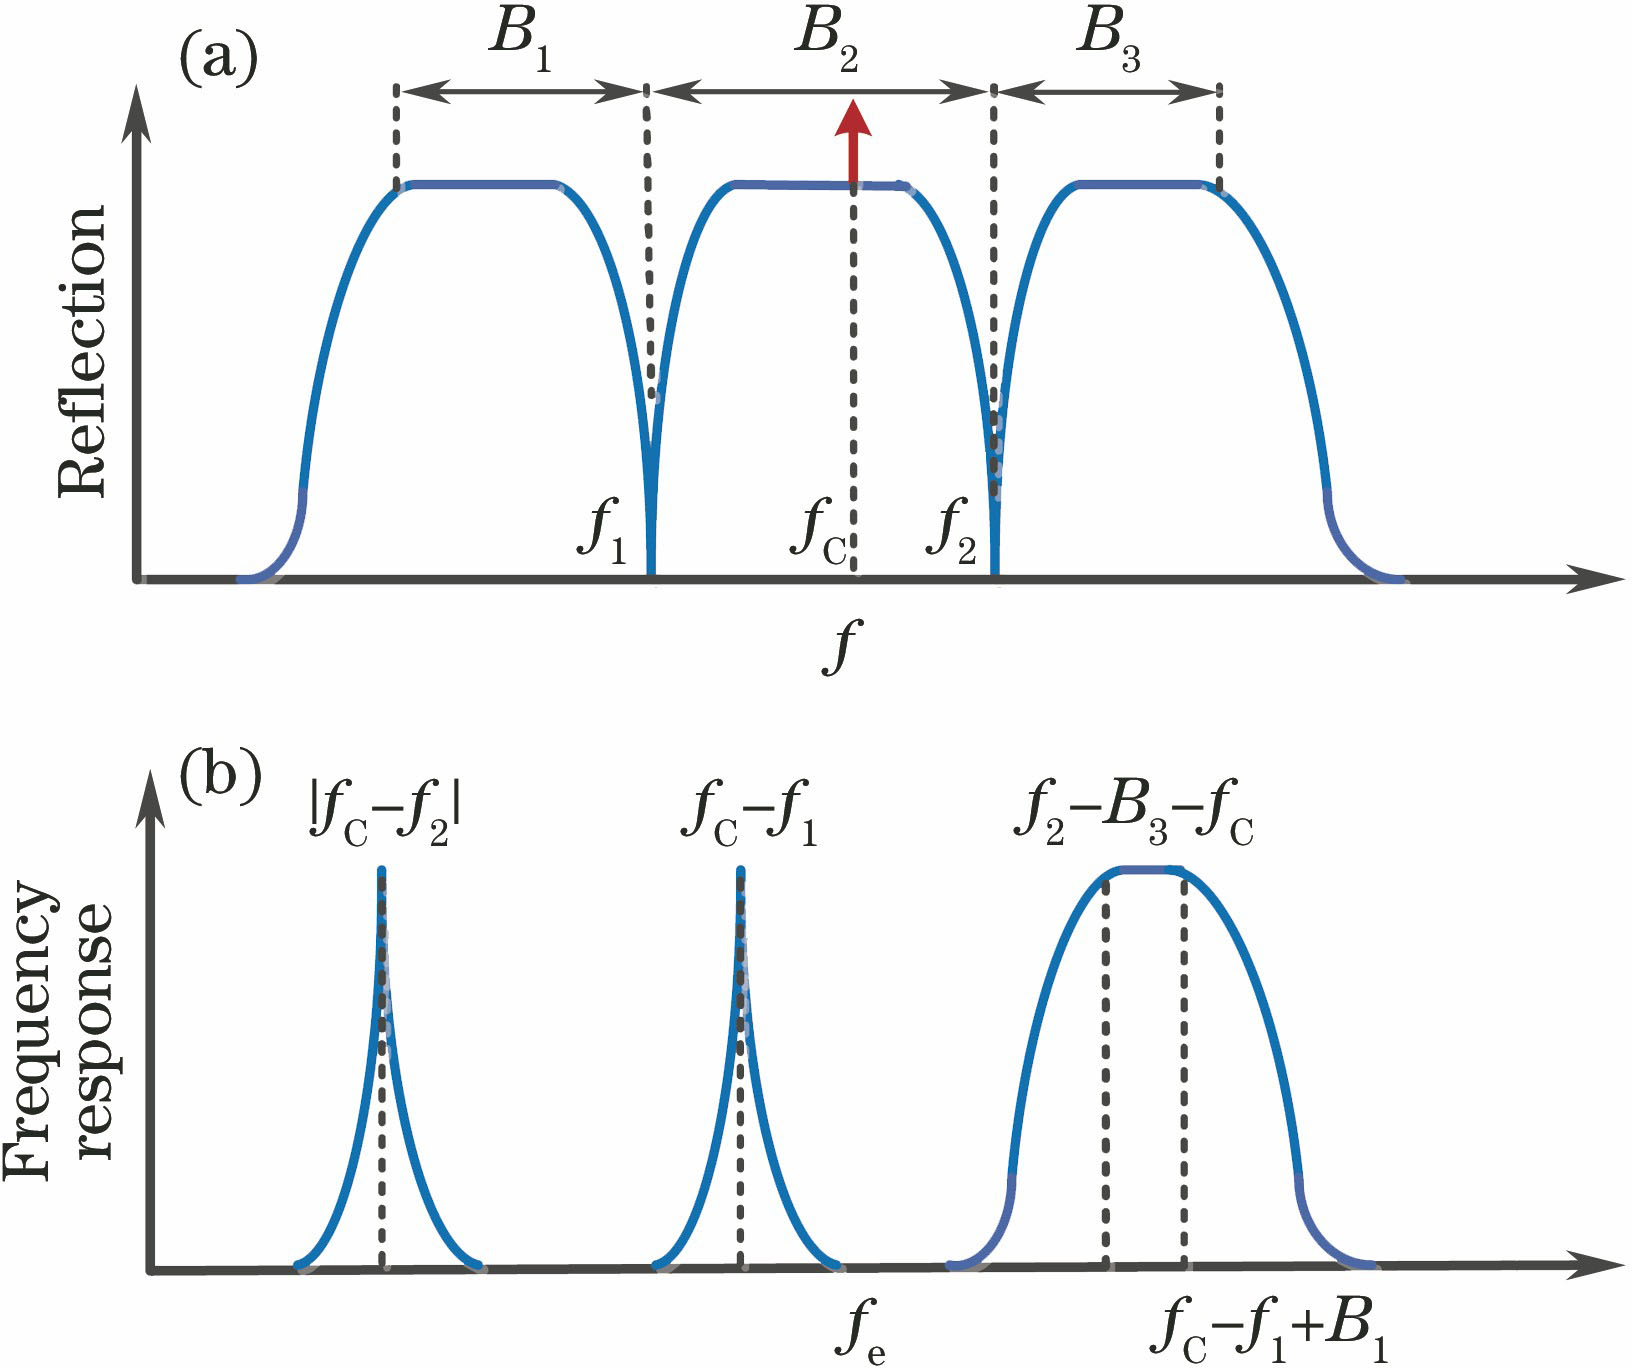 Principle of microwave photonic filter based on dual-phase-shifted fiber grating. (a) Reflection spectrum of fiber grating with two phase shifts;(b) power spectrum of microwave photonic filter based on phase-shifted fiber grating